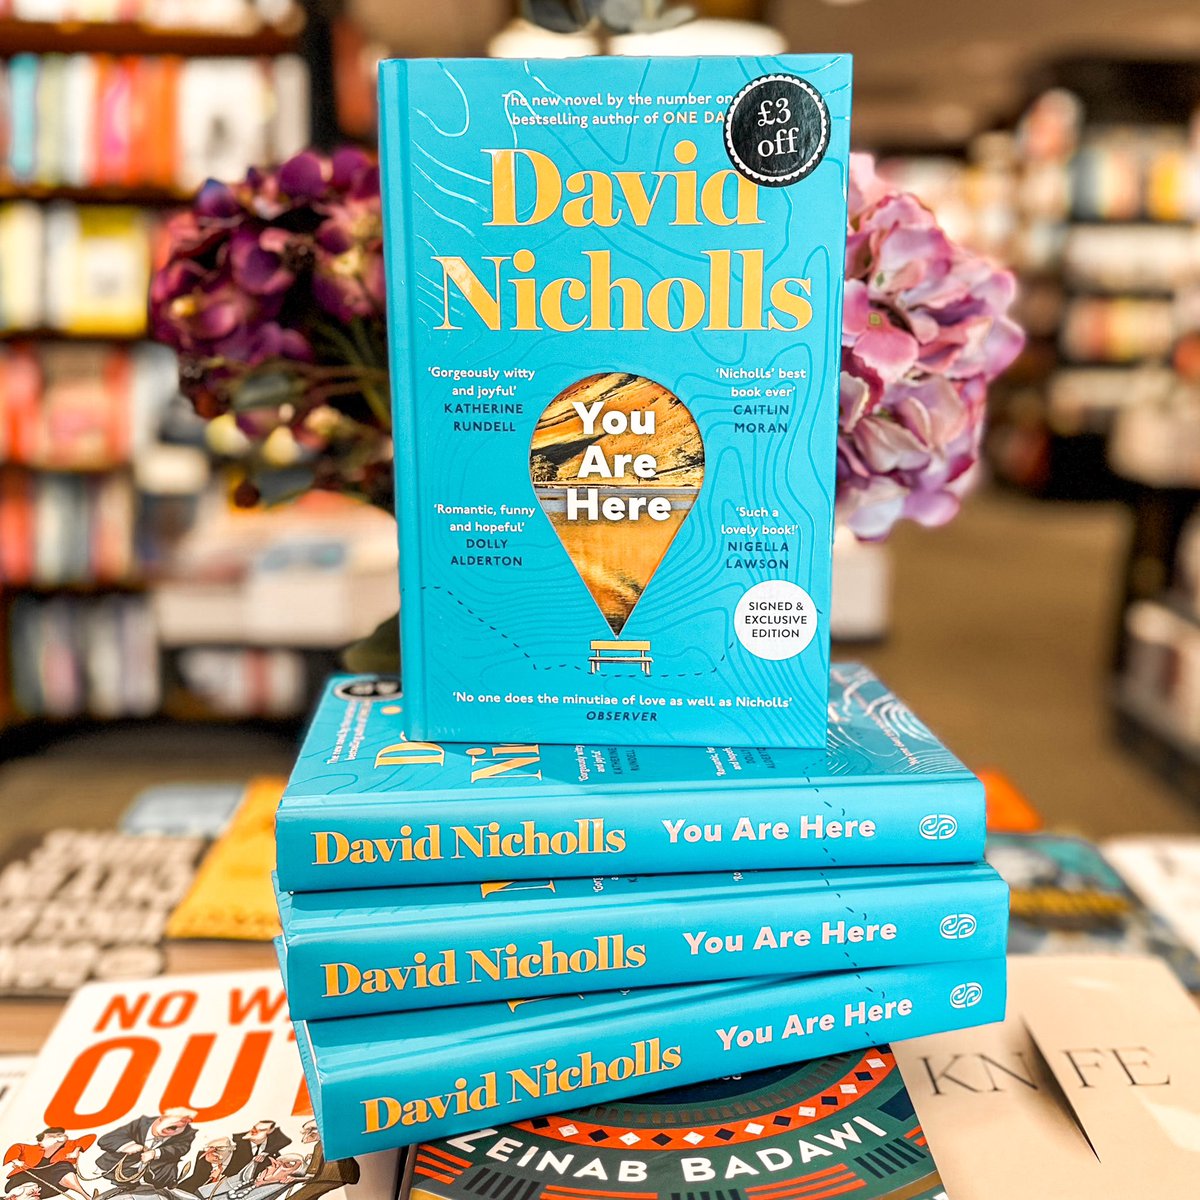 You Are Here! 📍🧭🥾

The brand new novel by David Nicholls, author of One Day, is here!

#waterstonesnorthallerton #northallerton #lovenorthallerton #youarehere #davidnicholls #oneday #coasttocoast #yorkshire